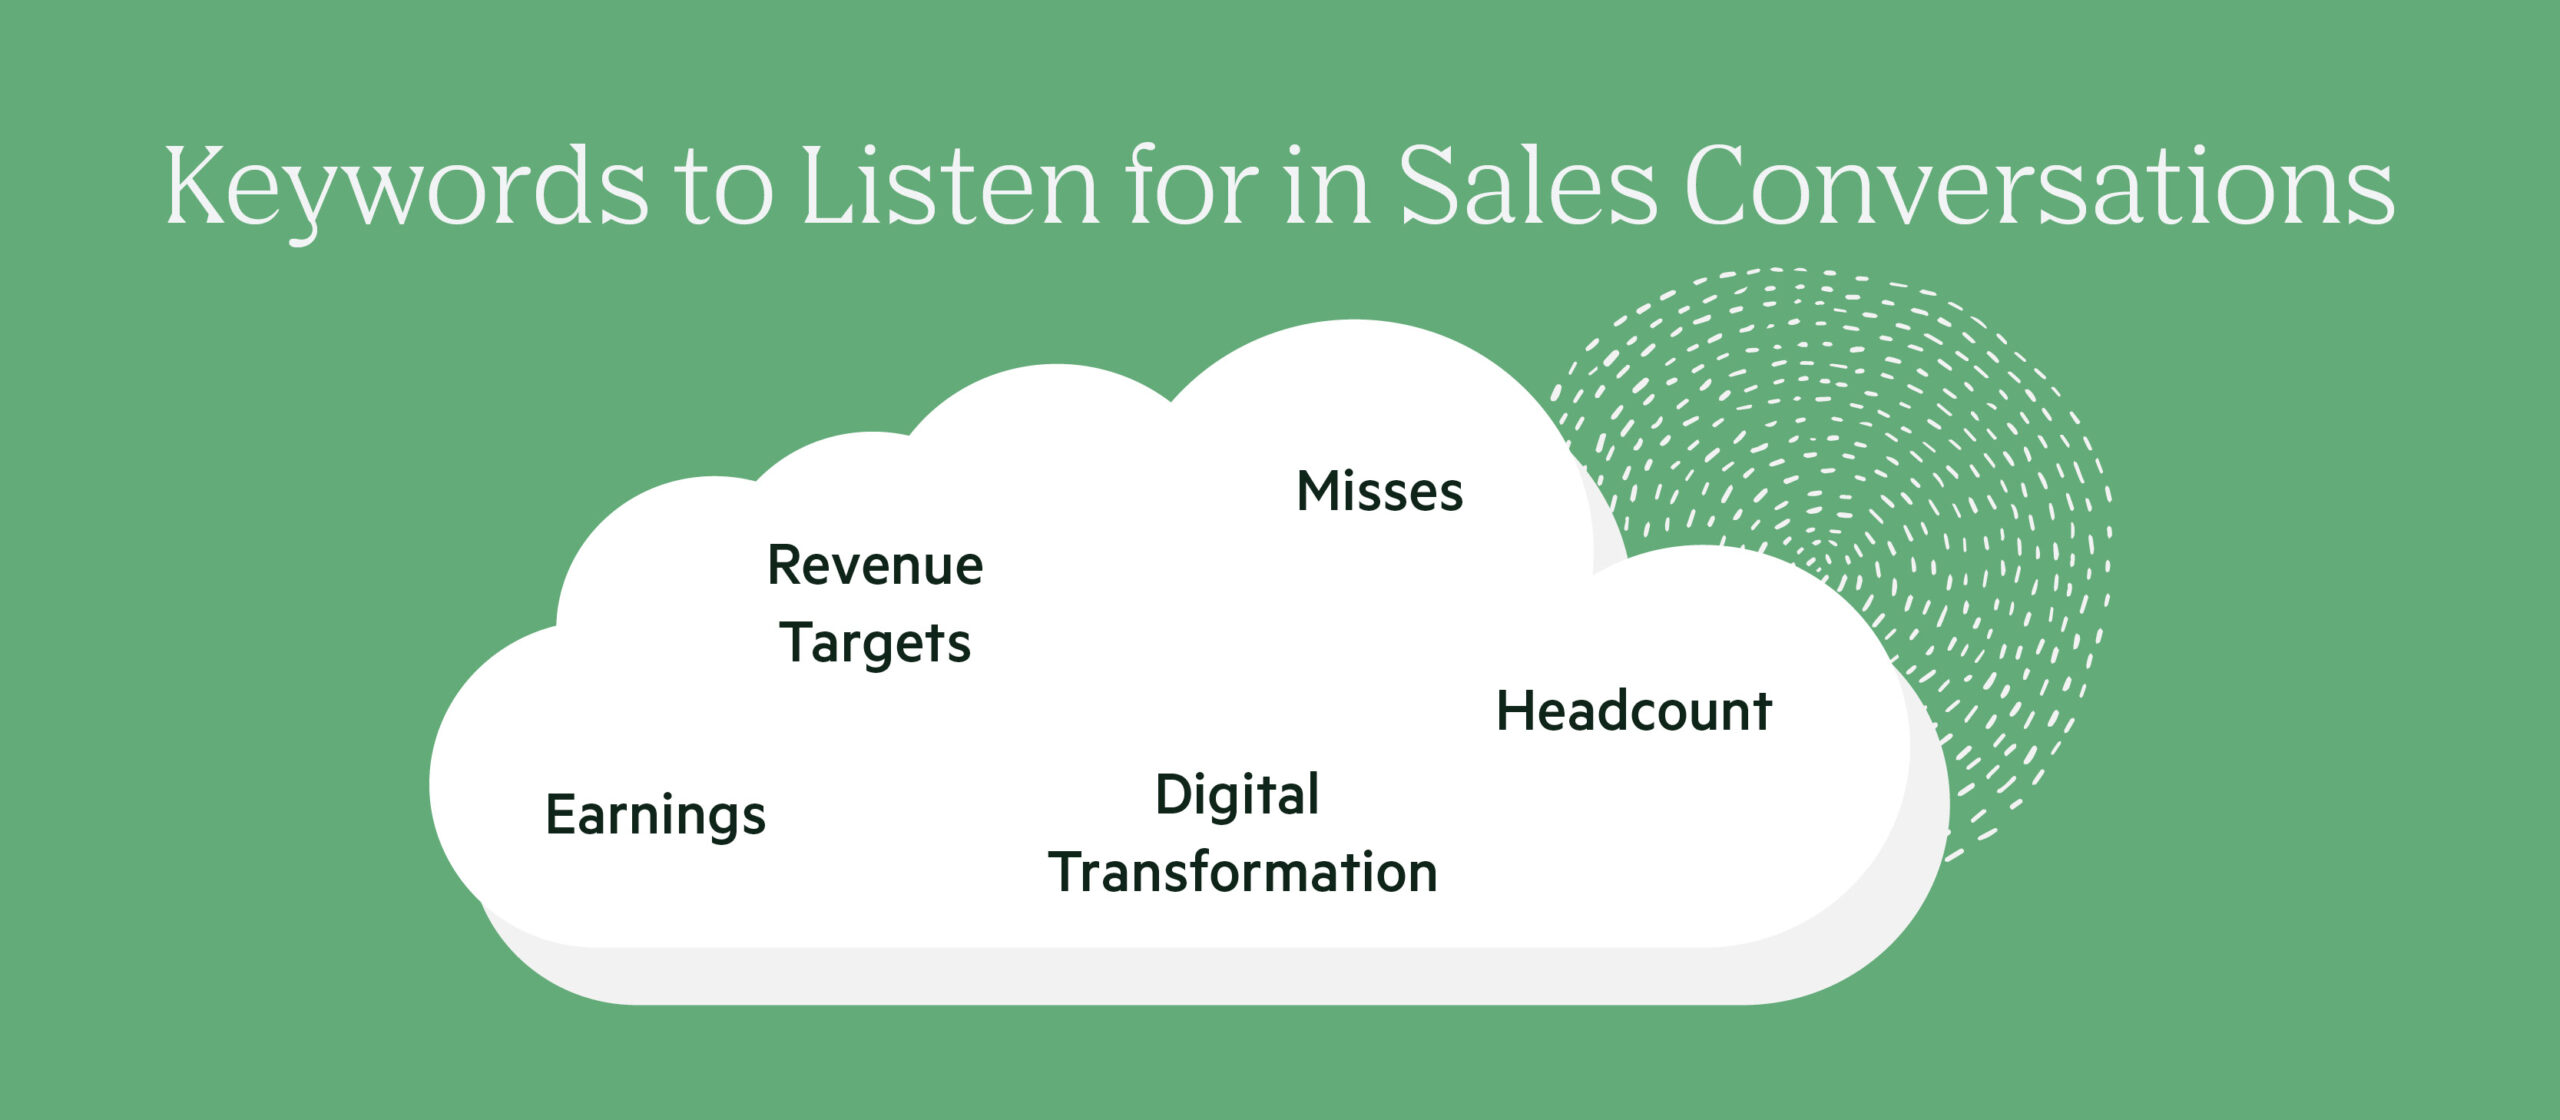 Keywords sales coaches listen for in challenging economy